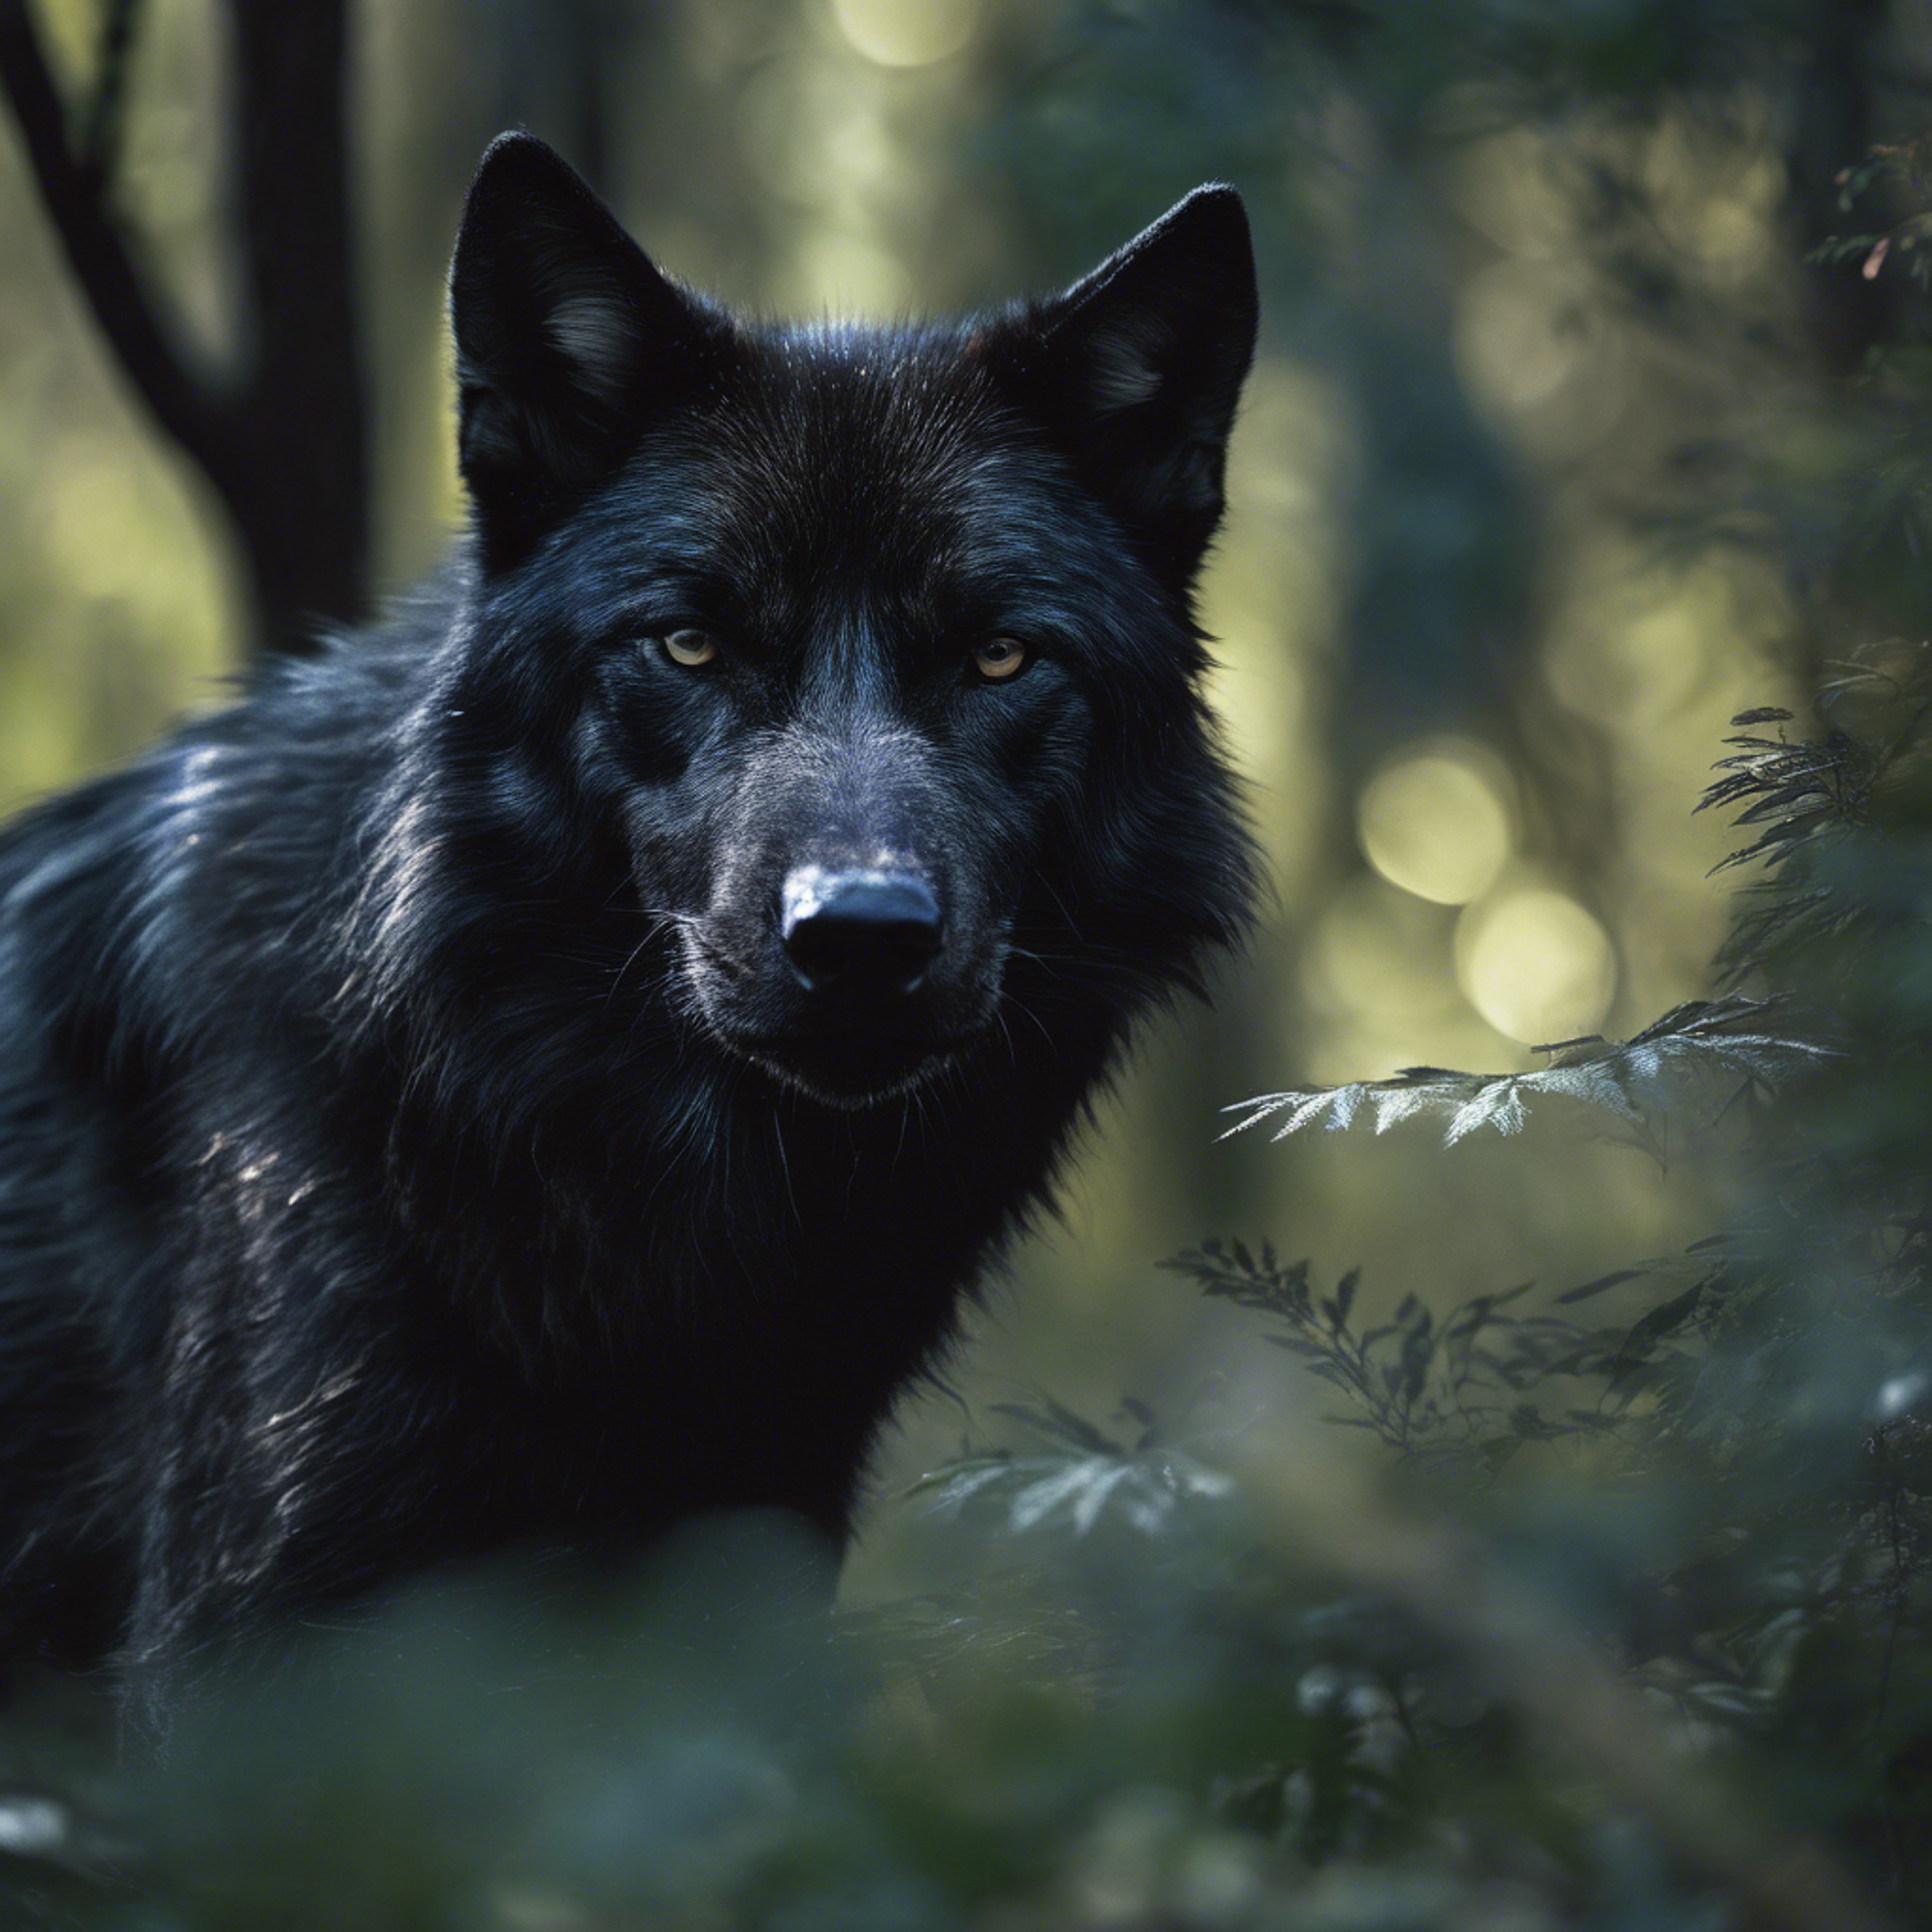 A black wolf camouflaged in the shadowy shades of a dense forest, ready to pounce on prey. Wallpaper[8e2c23357bd04da18408]